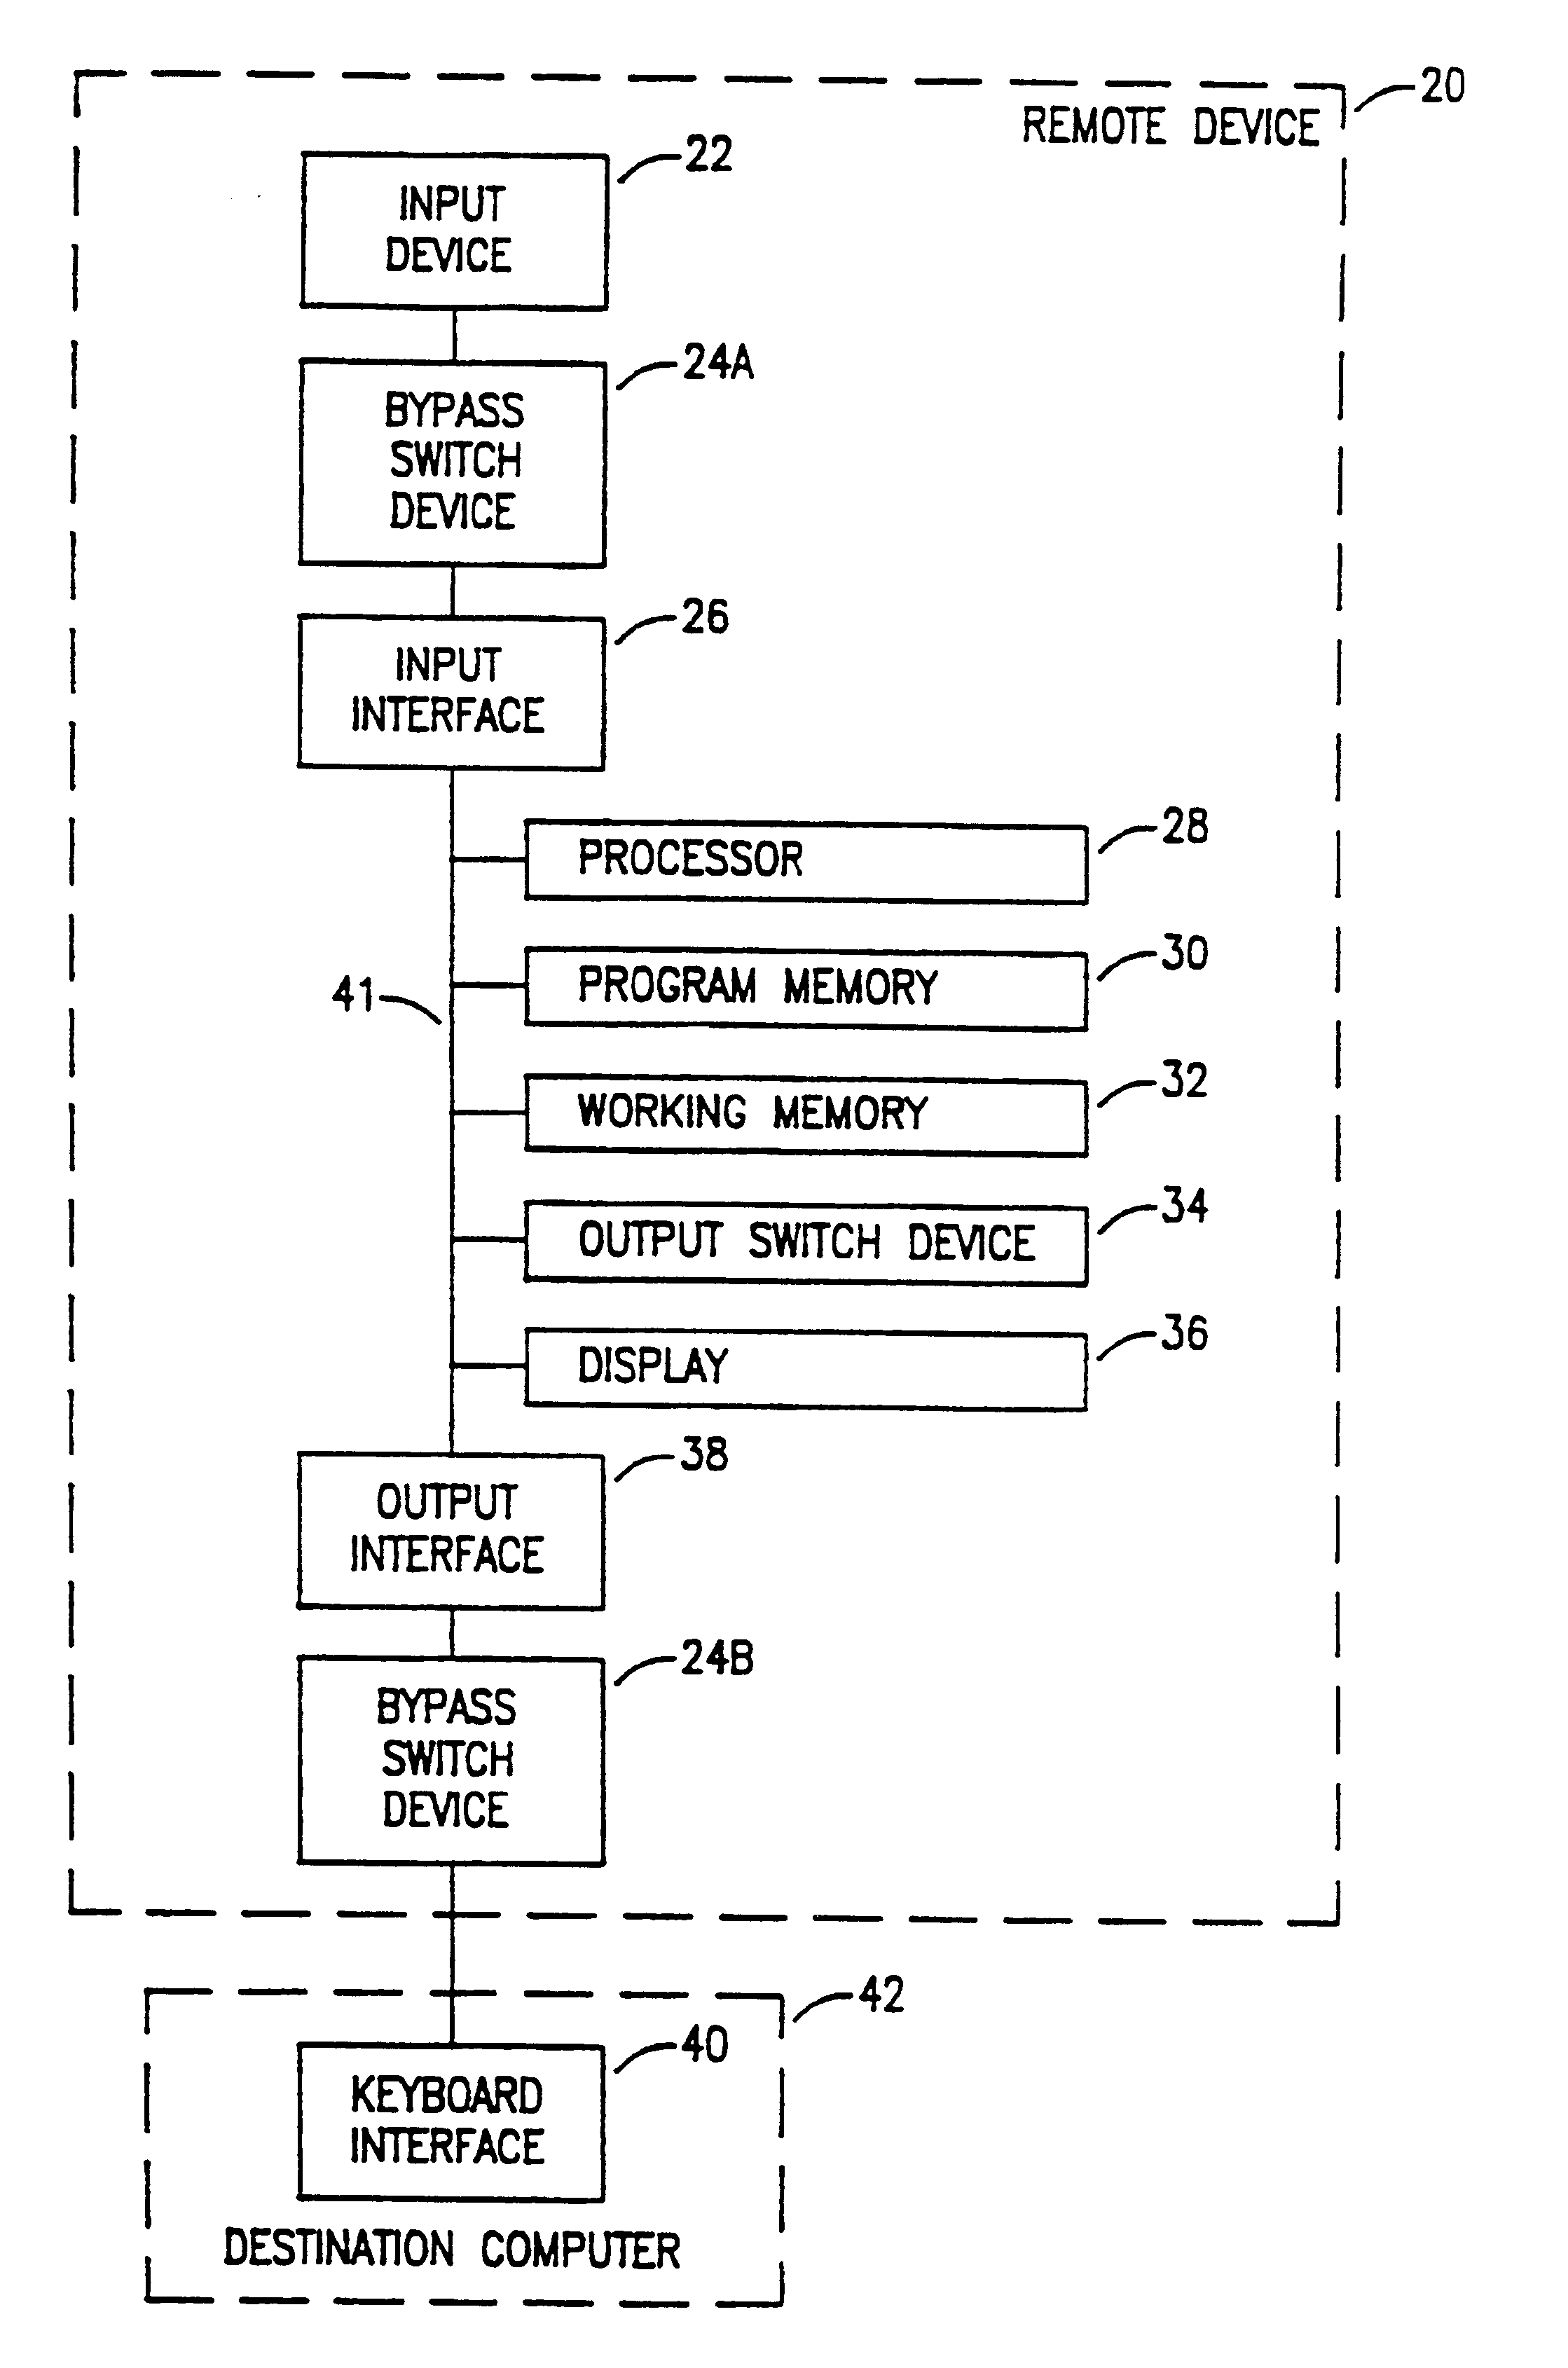 Portable data storage and editing device